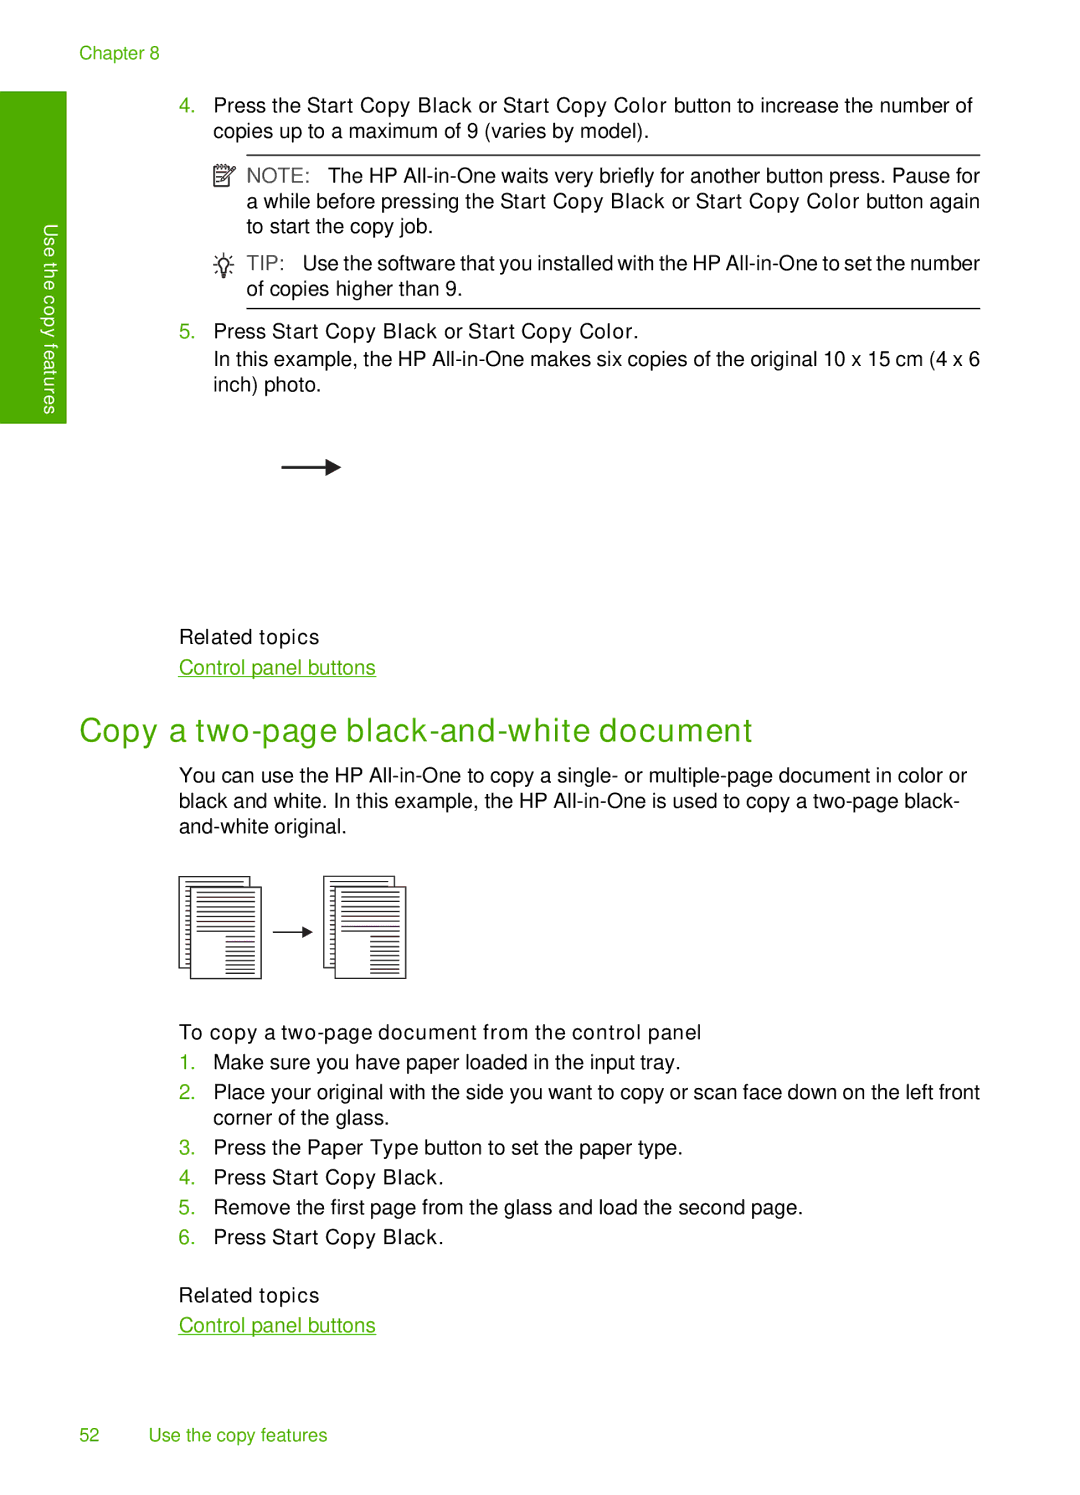 HP F4180, F4140, F4185, F4172 Copy a two-page black-and-white document, To copy a two-page document from the control panel 